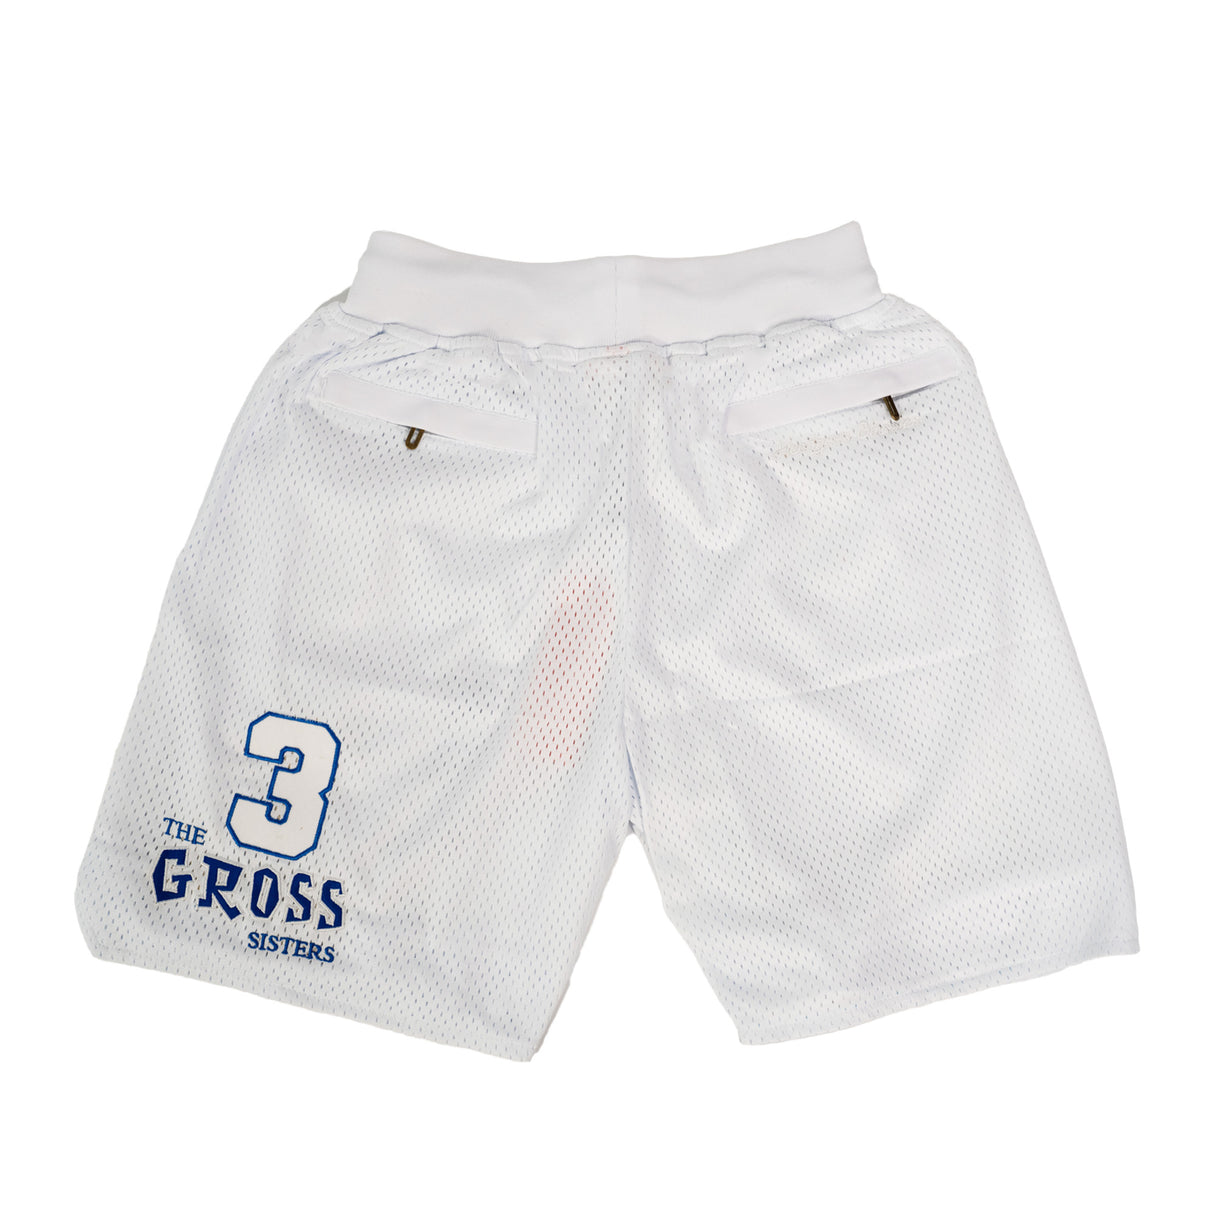 THE GROSS SISTERS TRIO SHORTS (WHITE)